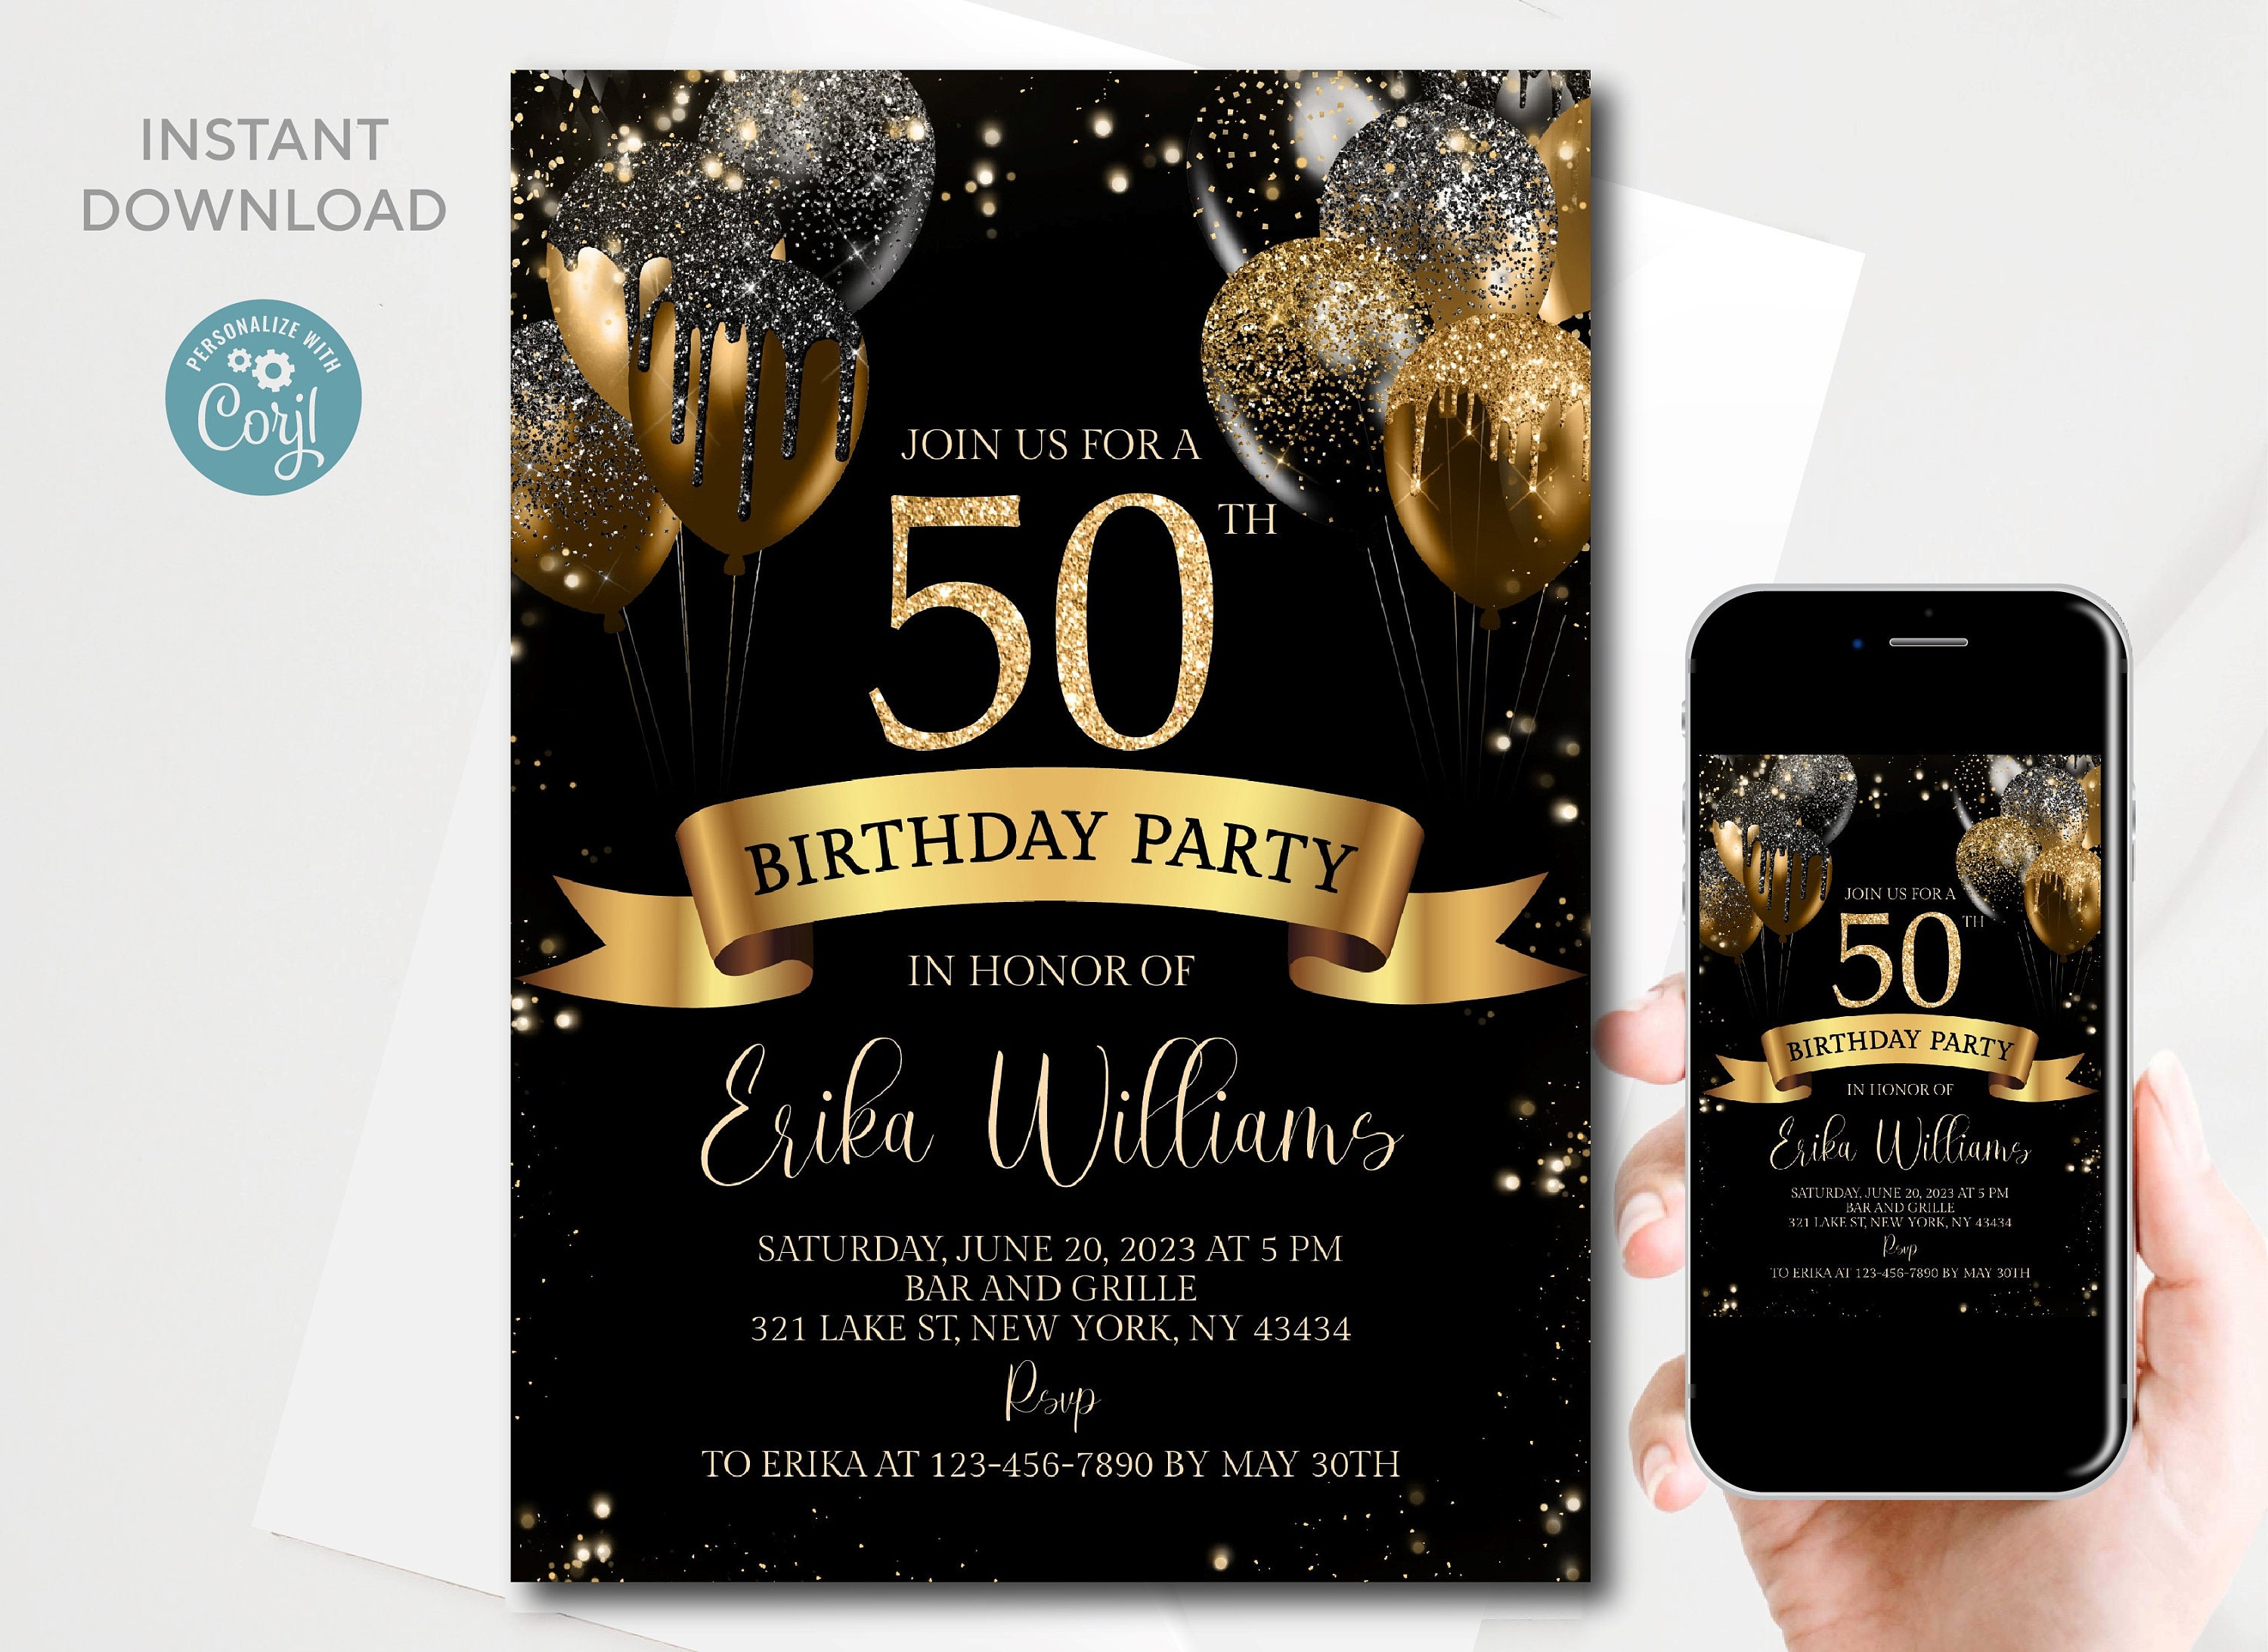 Egiftmaart Personalized Birthday Invitation Cards Pack Of 50 Cards